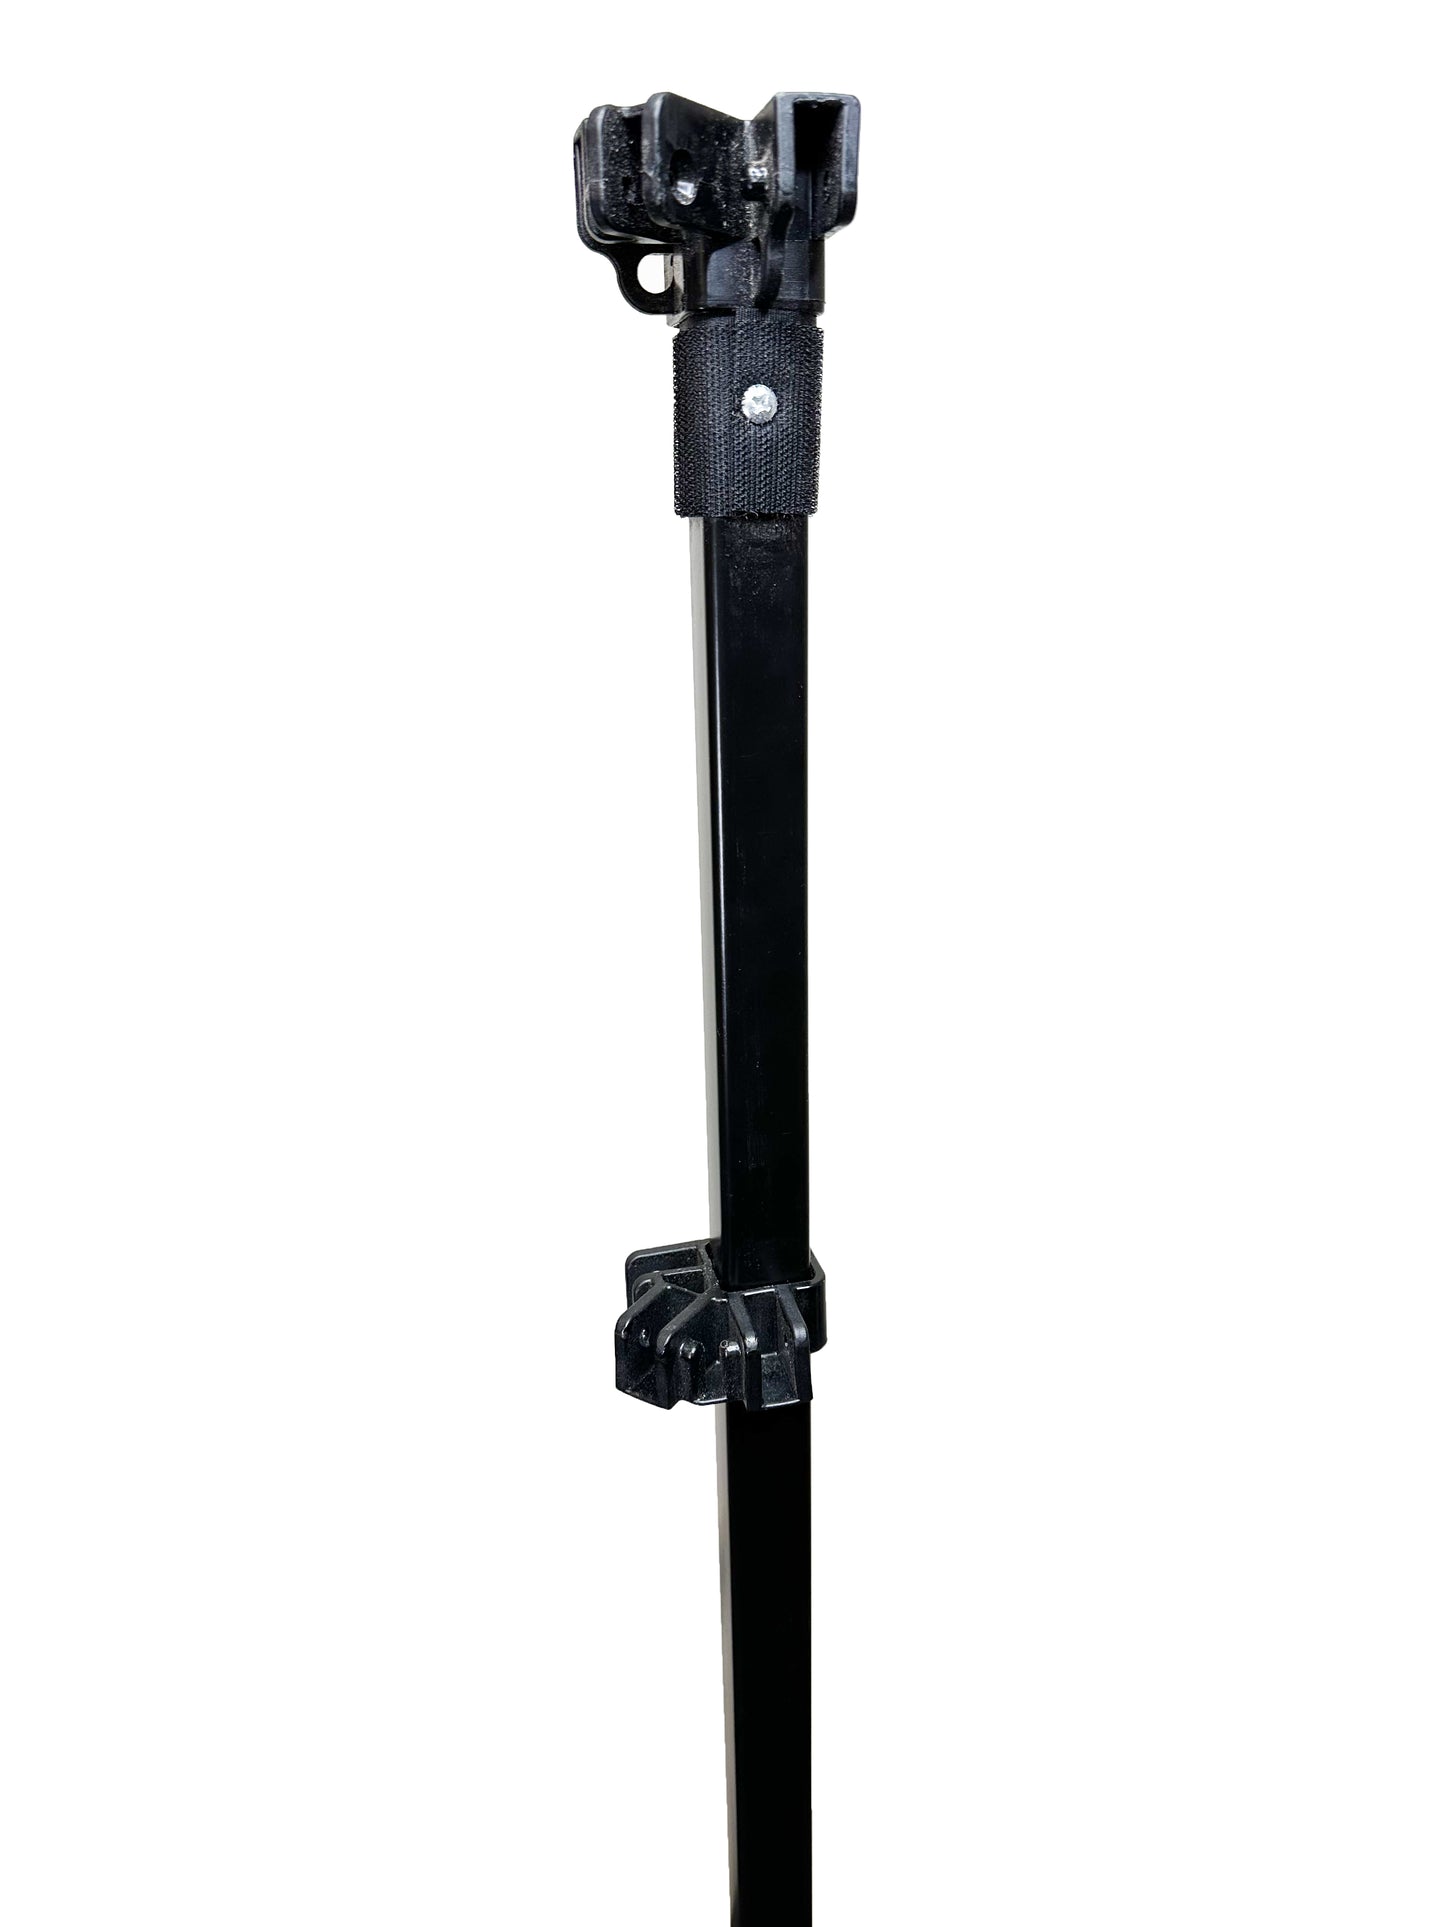 for Ozark Trail 10' x 10' Simple Push Straight Leg Canopy Adjustable Leg 83.5" Replacement Parts (Black)